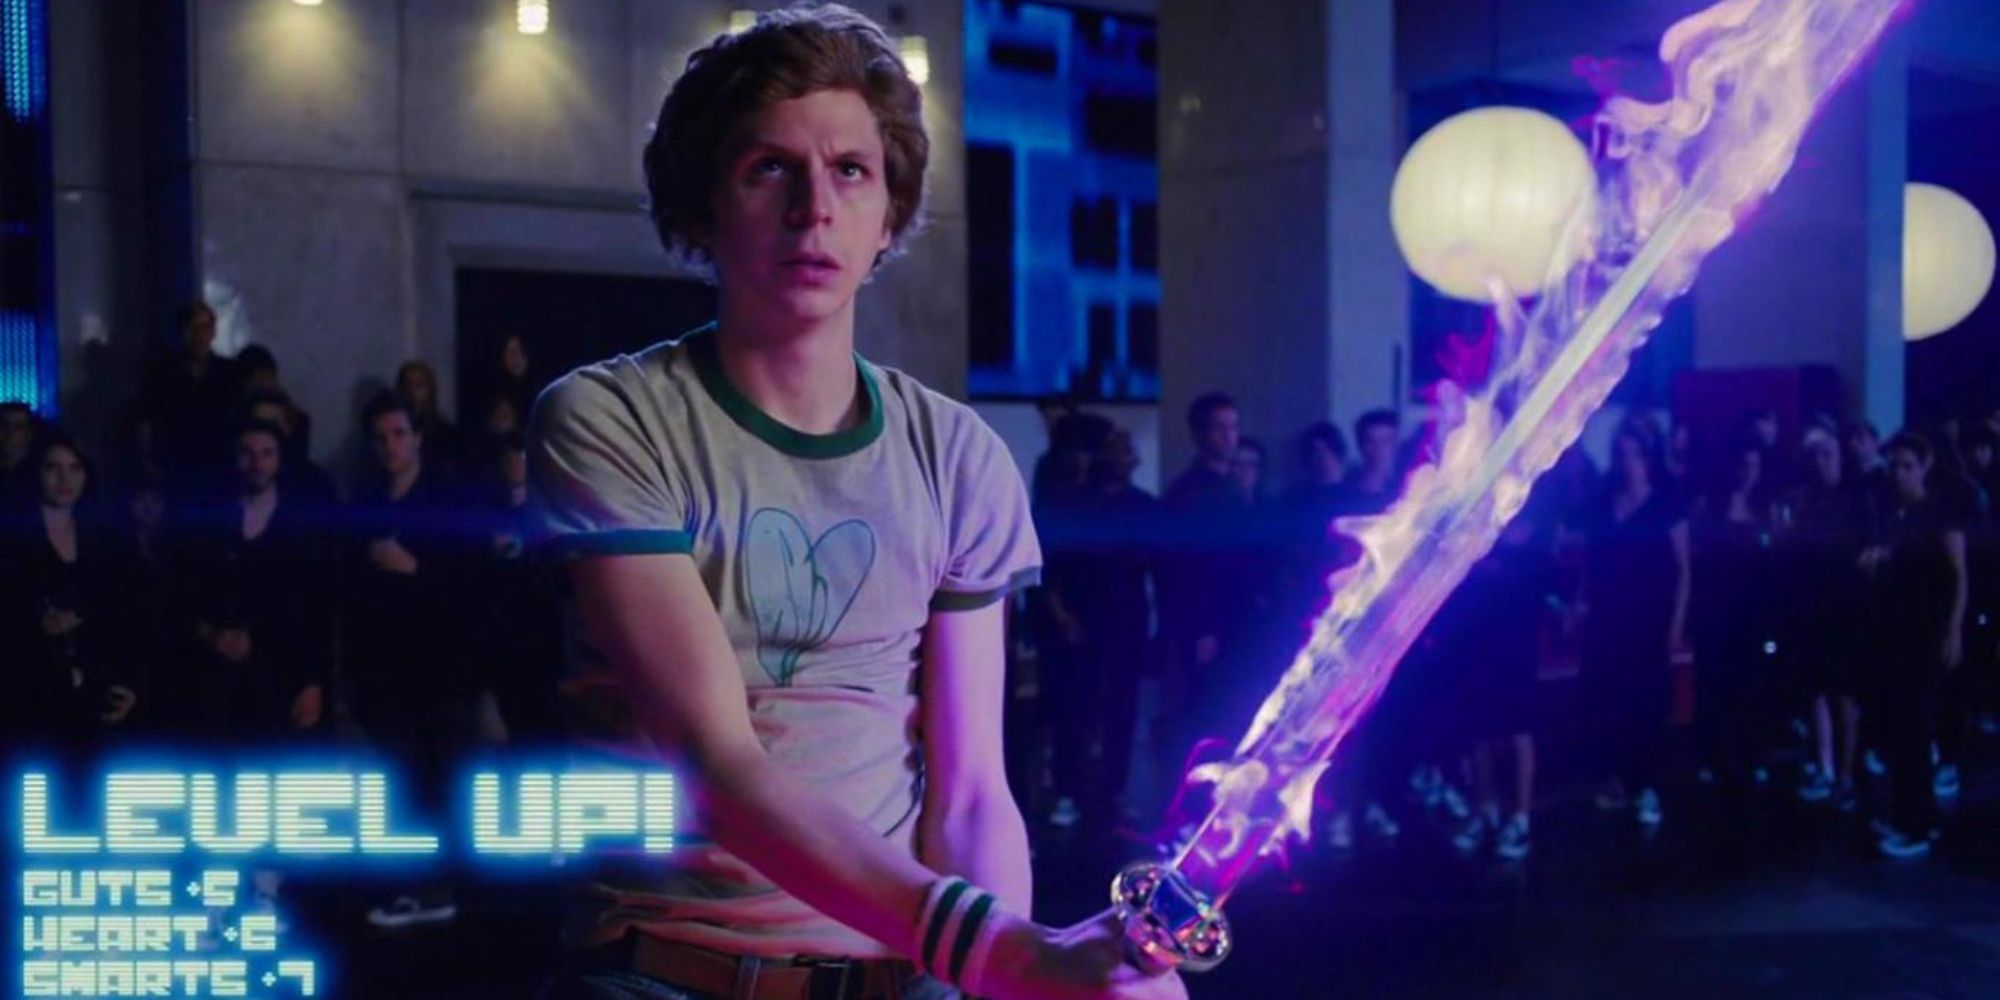 Scott holding a flaming sword after leveling up